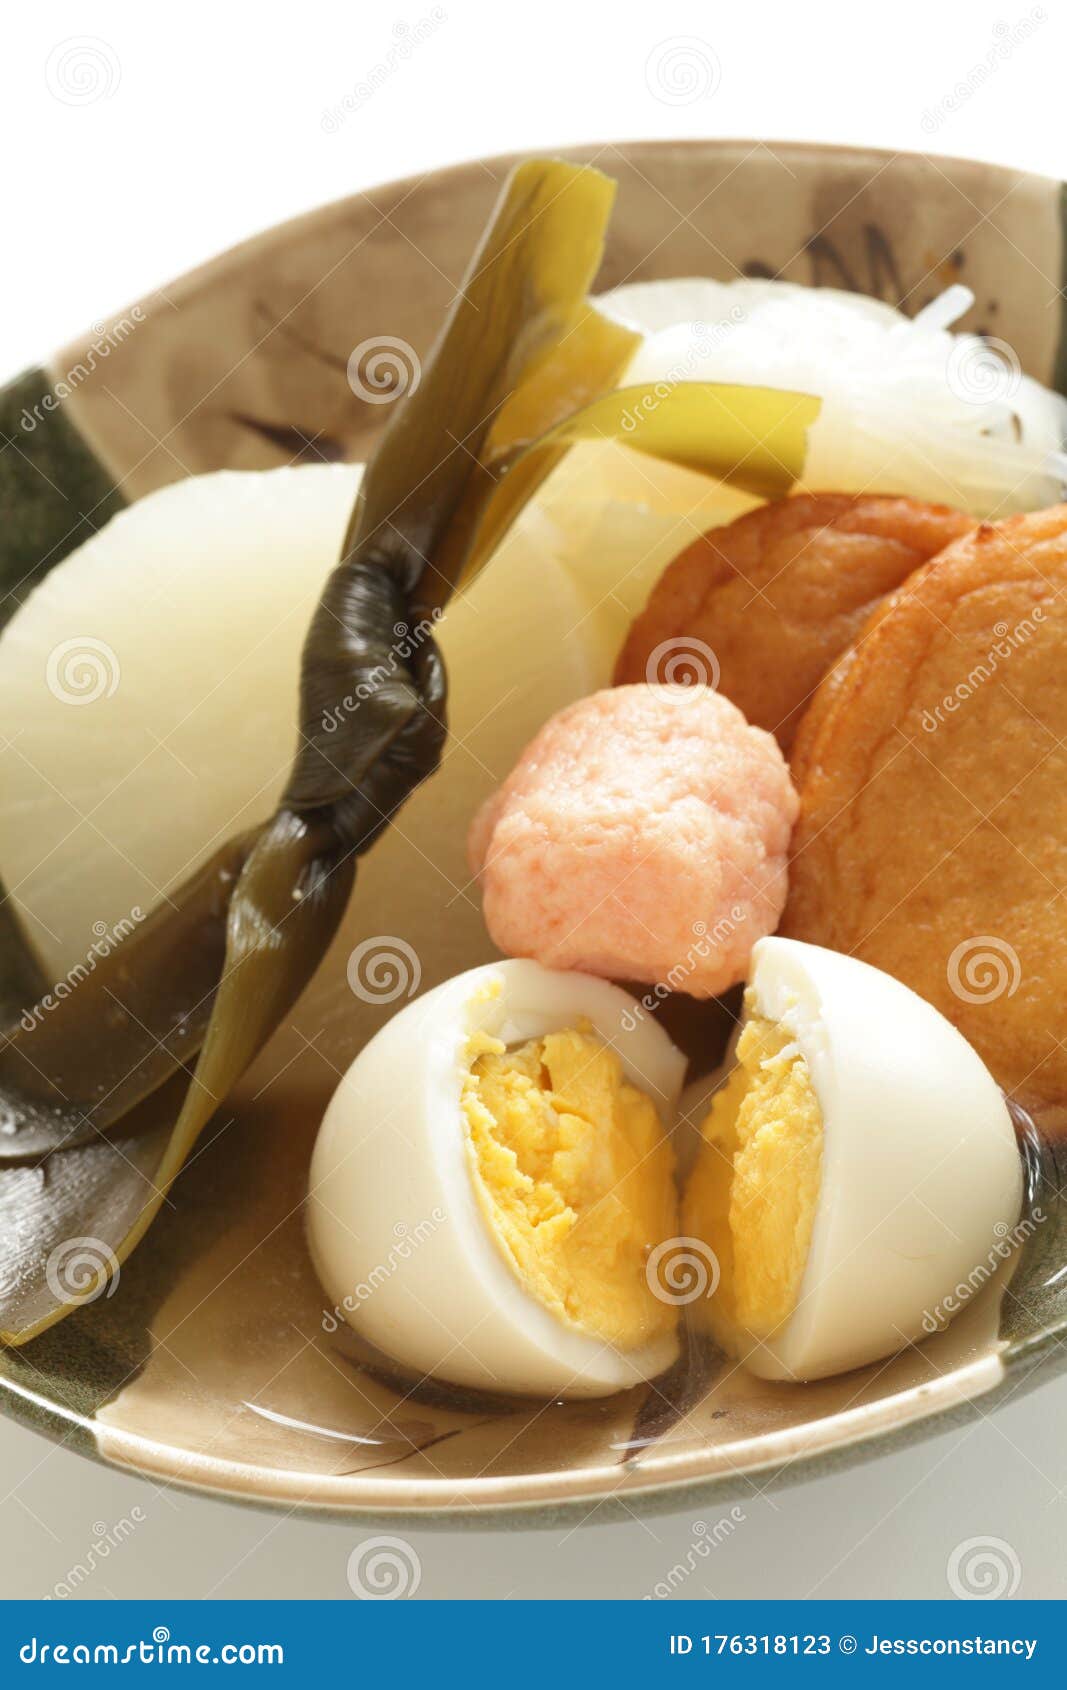 Japanese Winter Food, Oden Simmered Broth and Fish Cake Stock Image ...